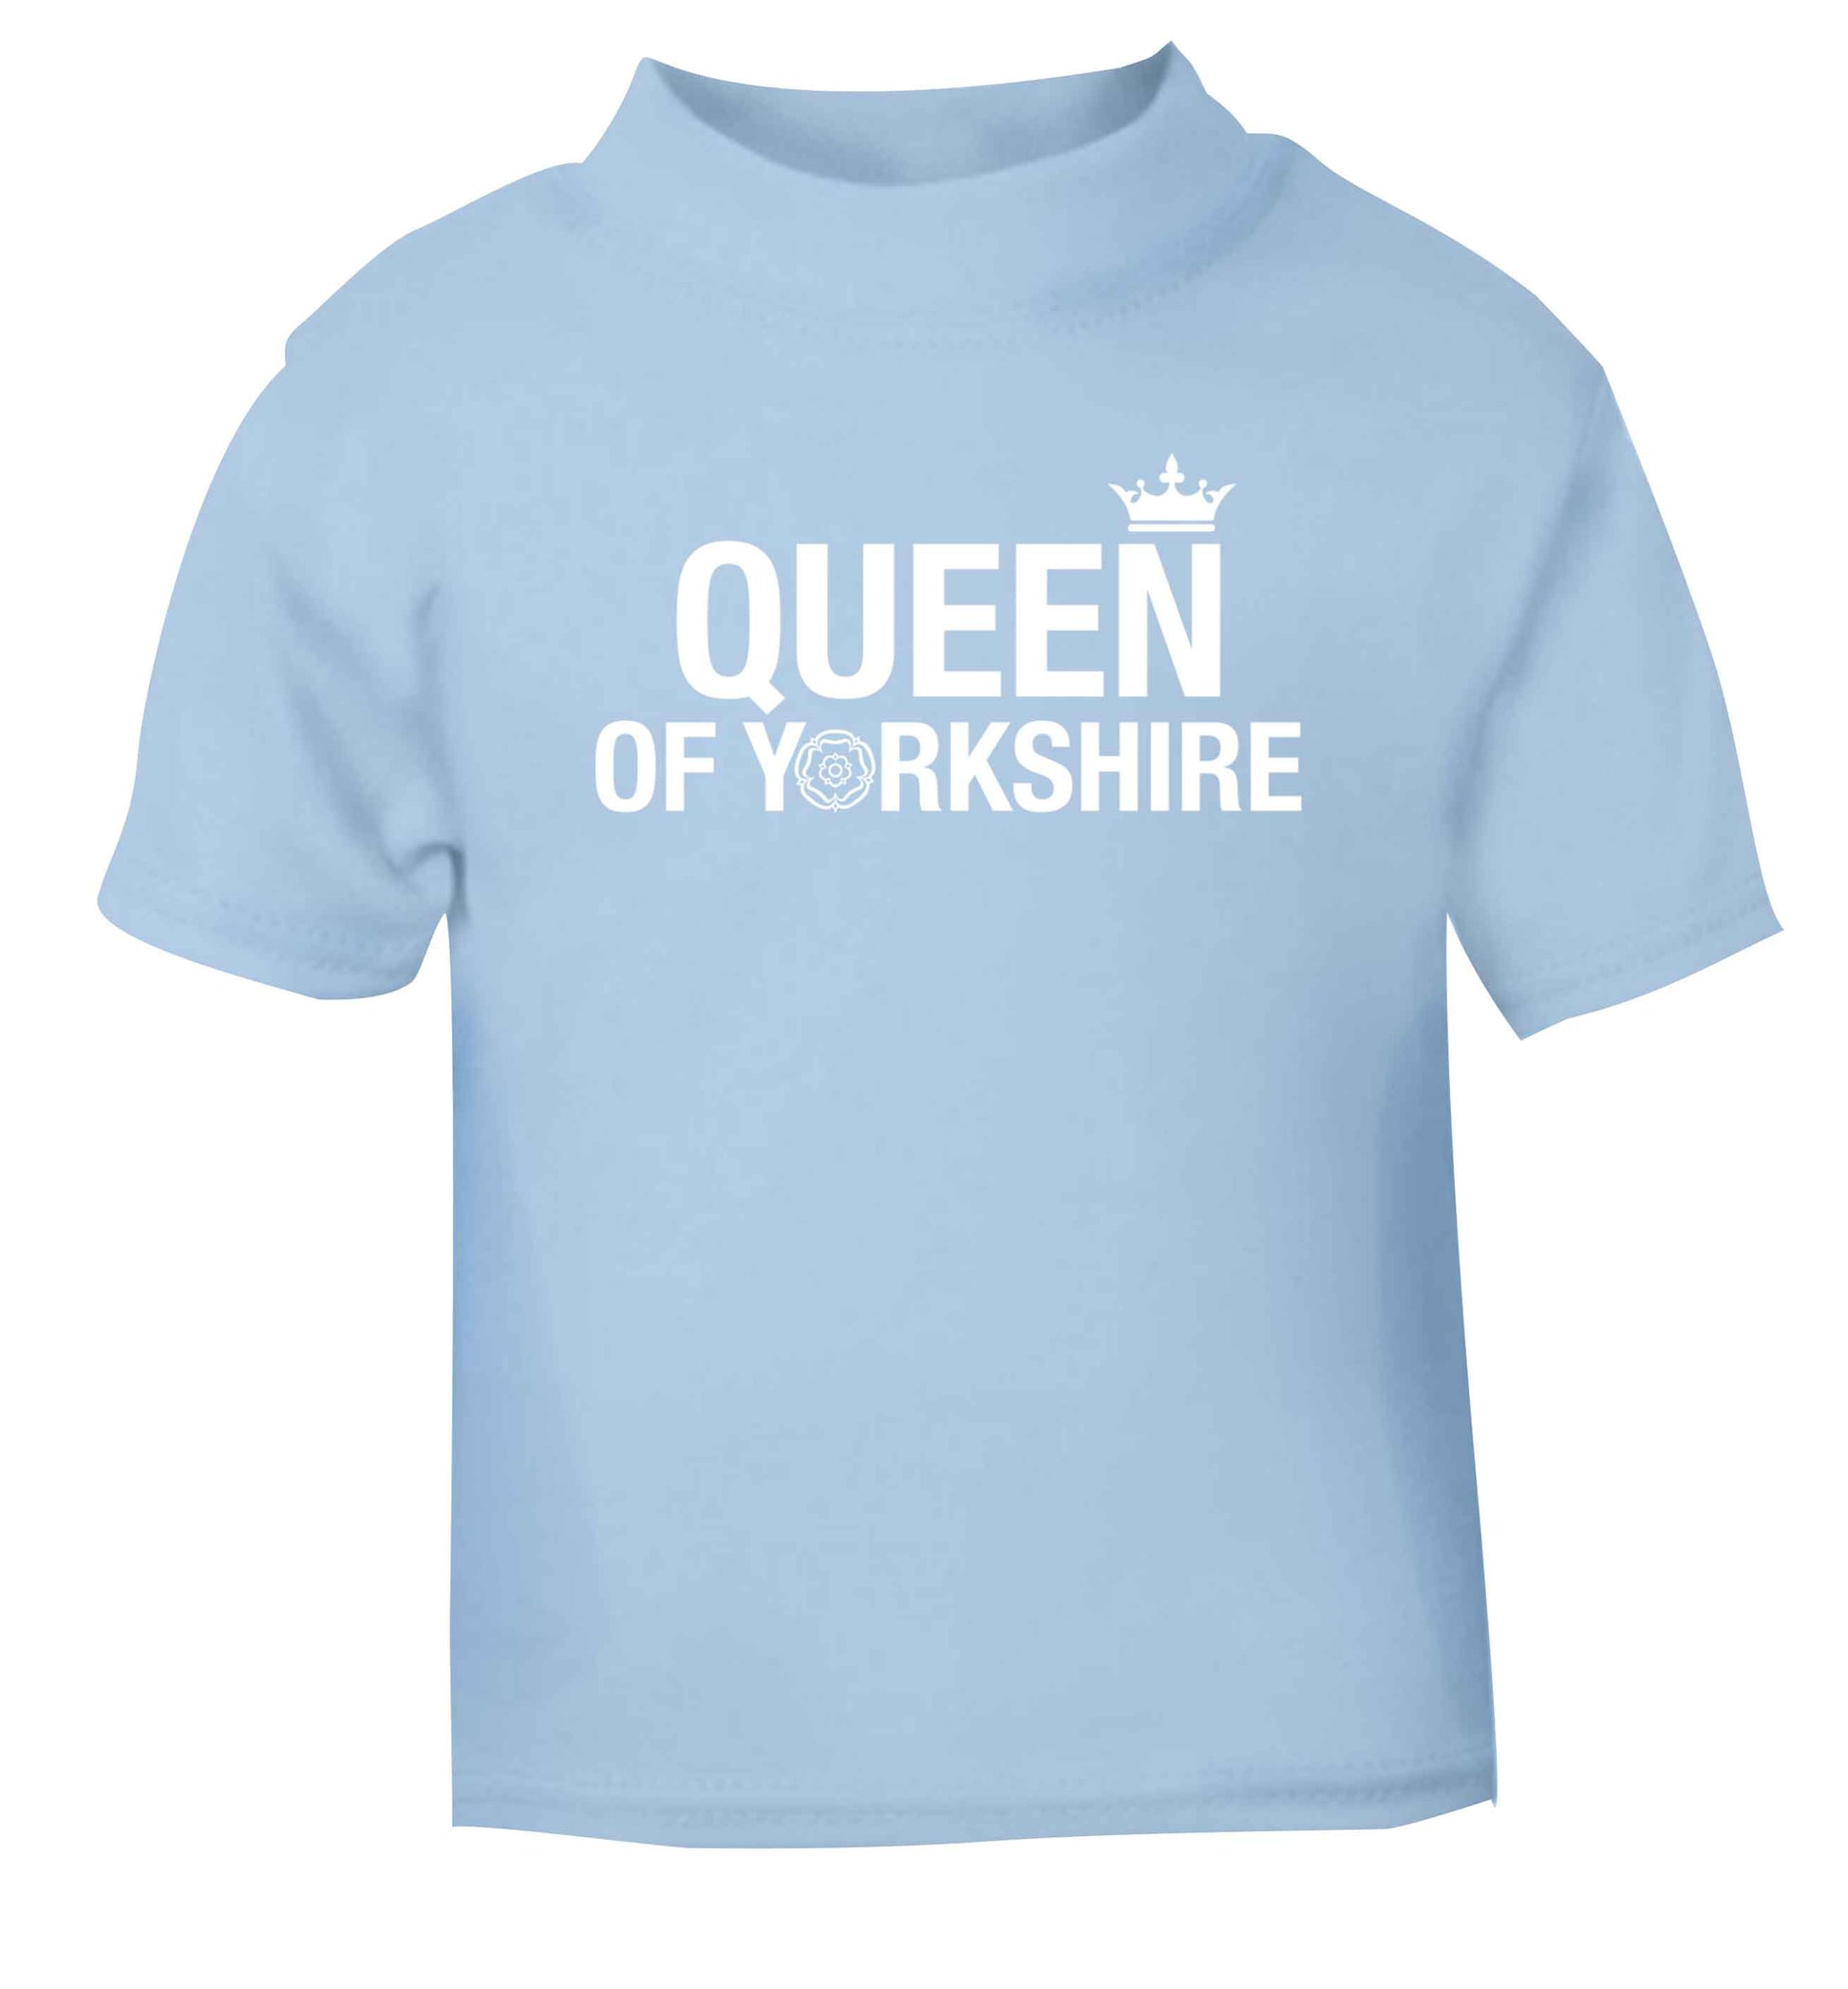 Queen of Yorkshire light blue Baby Toddler Tshirt 2 Years